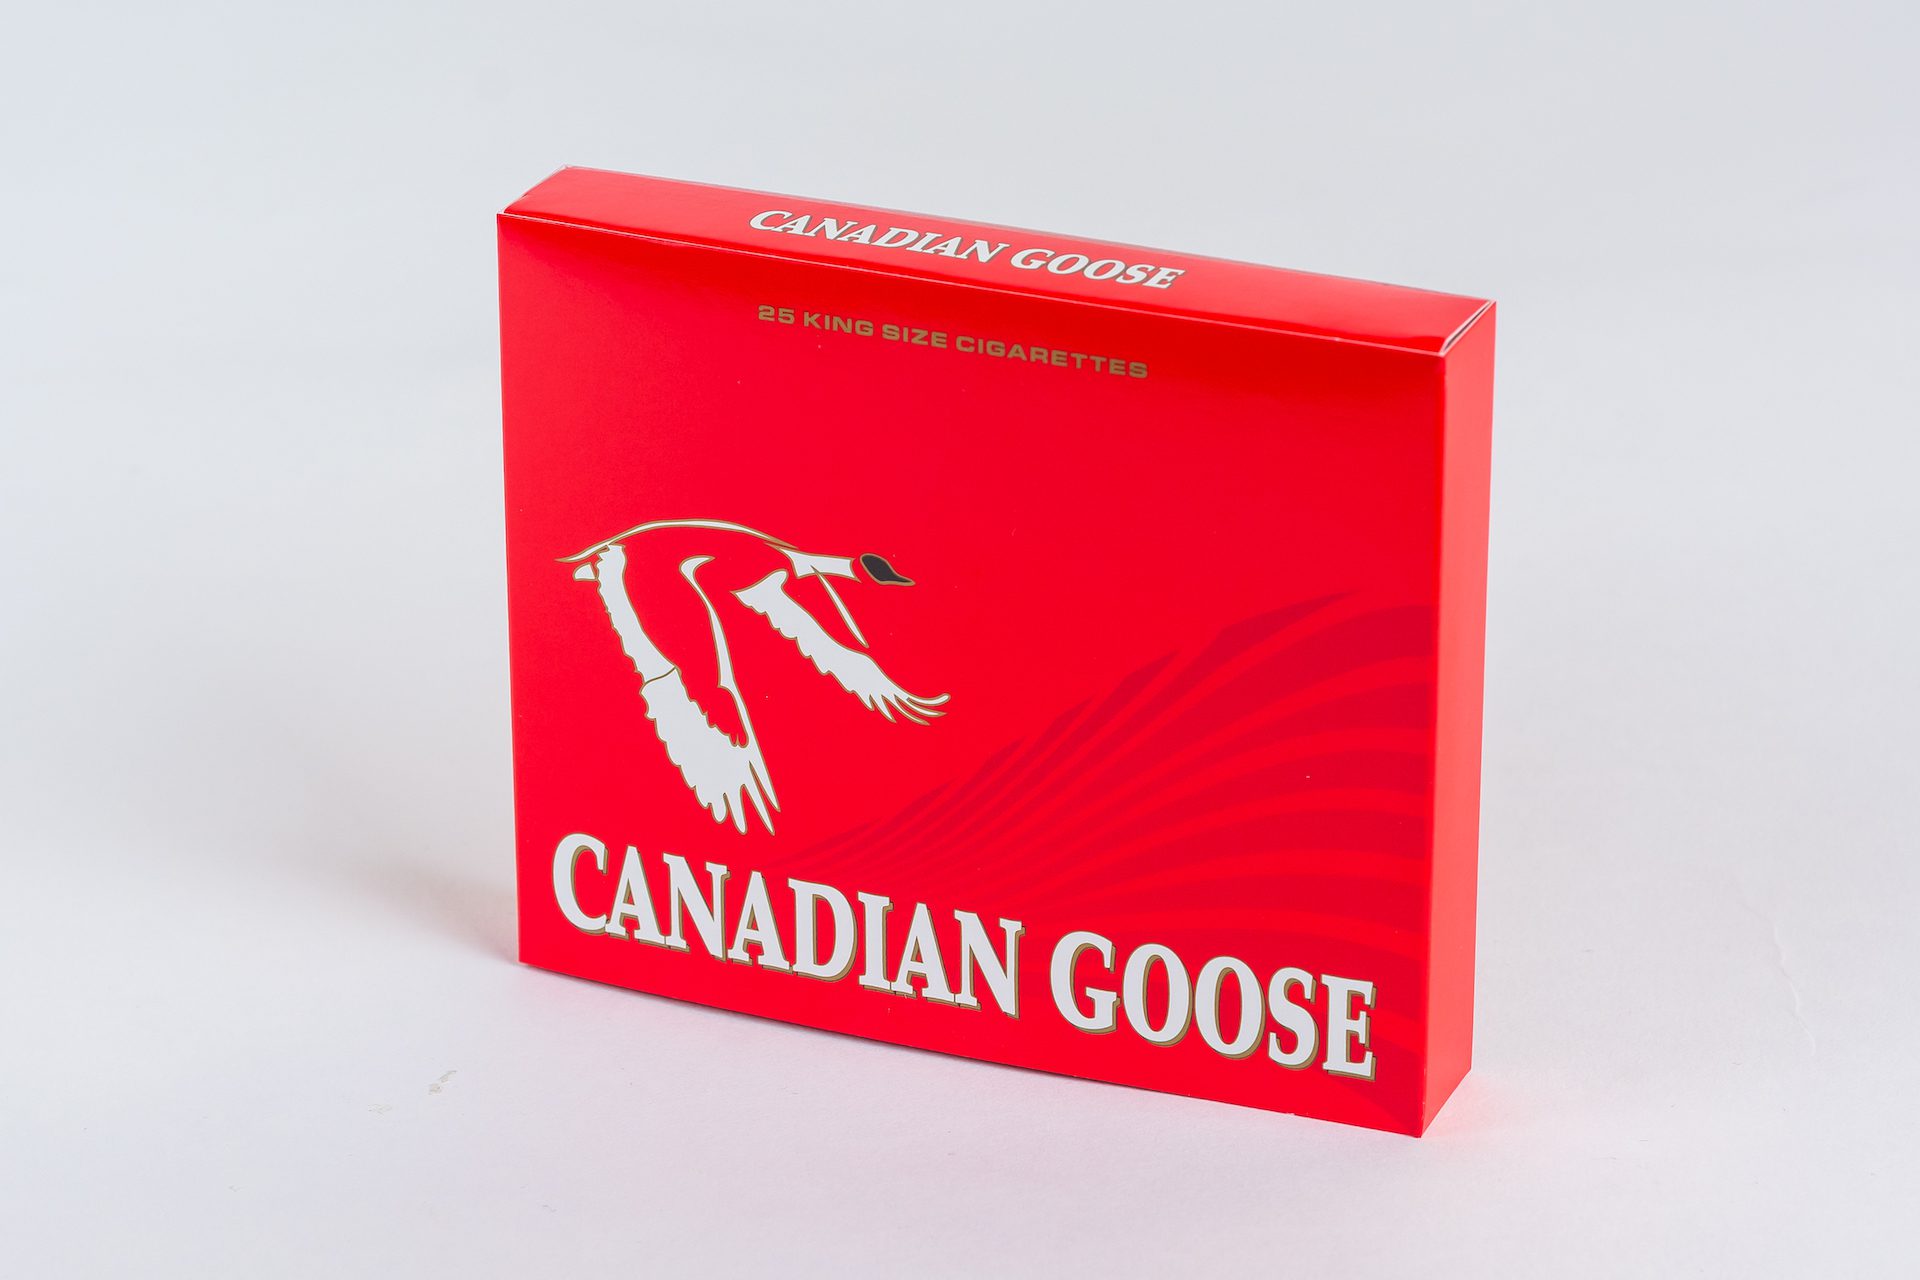 A Closed Pack of Canadian Goose Cigarettes